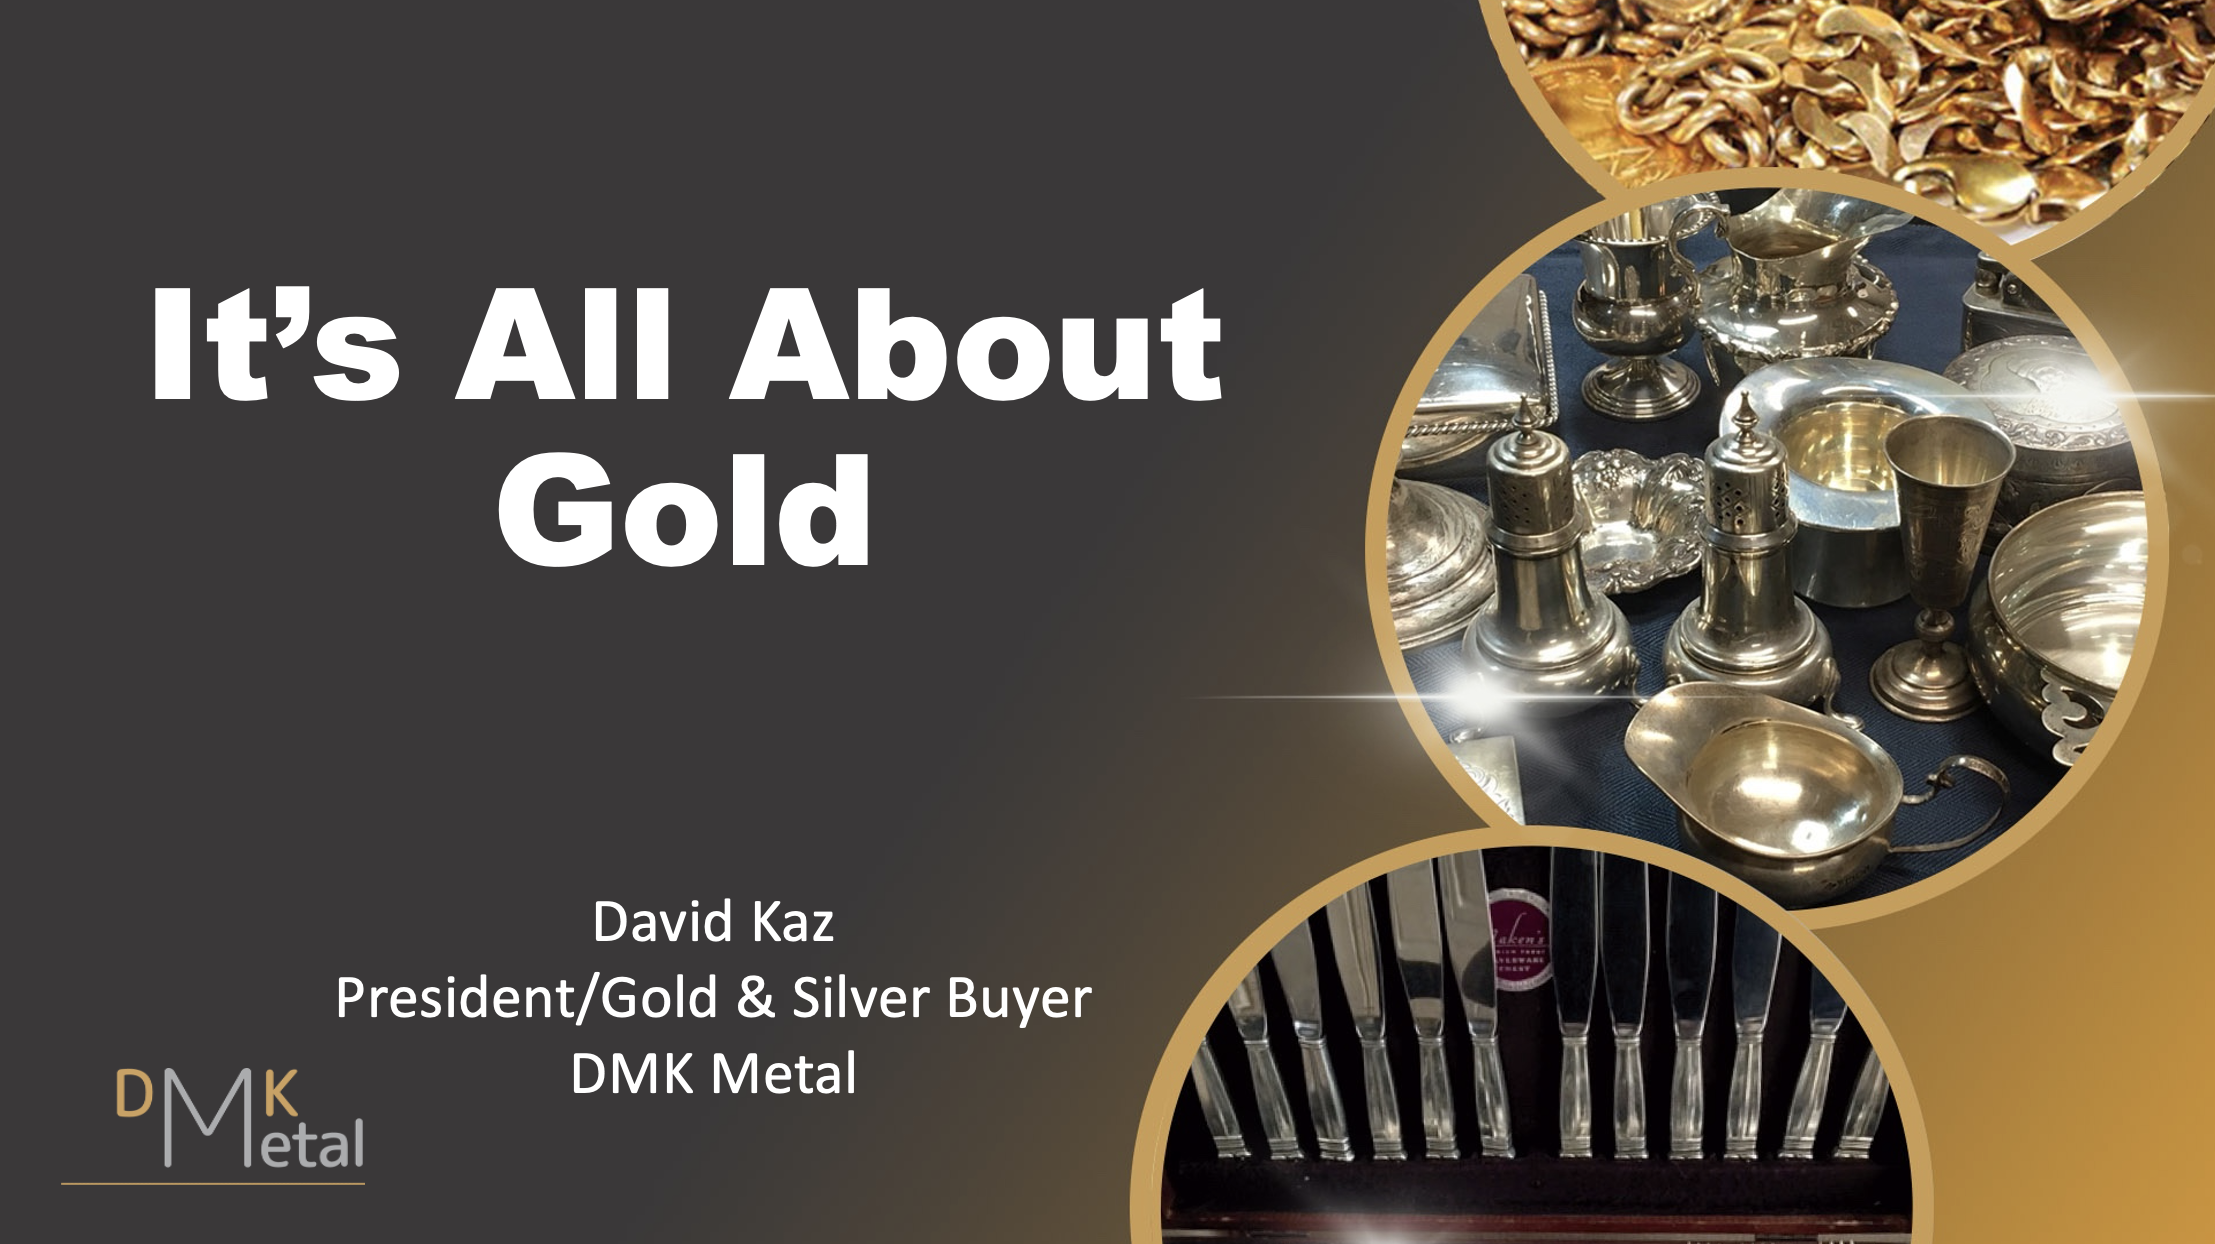 It's All About Gold | DMK Metal Presentation